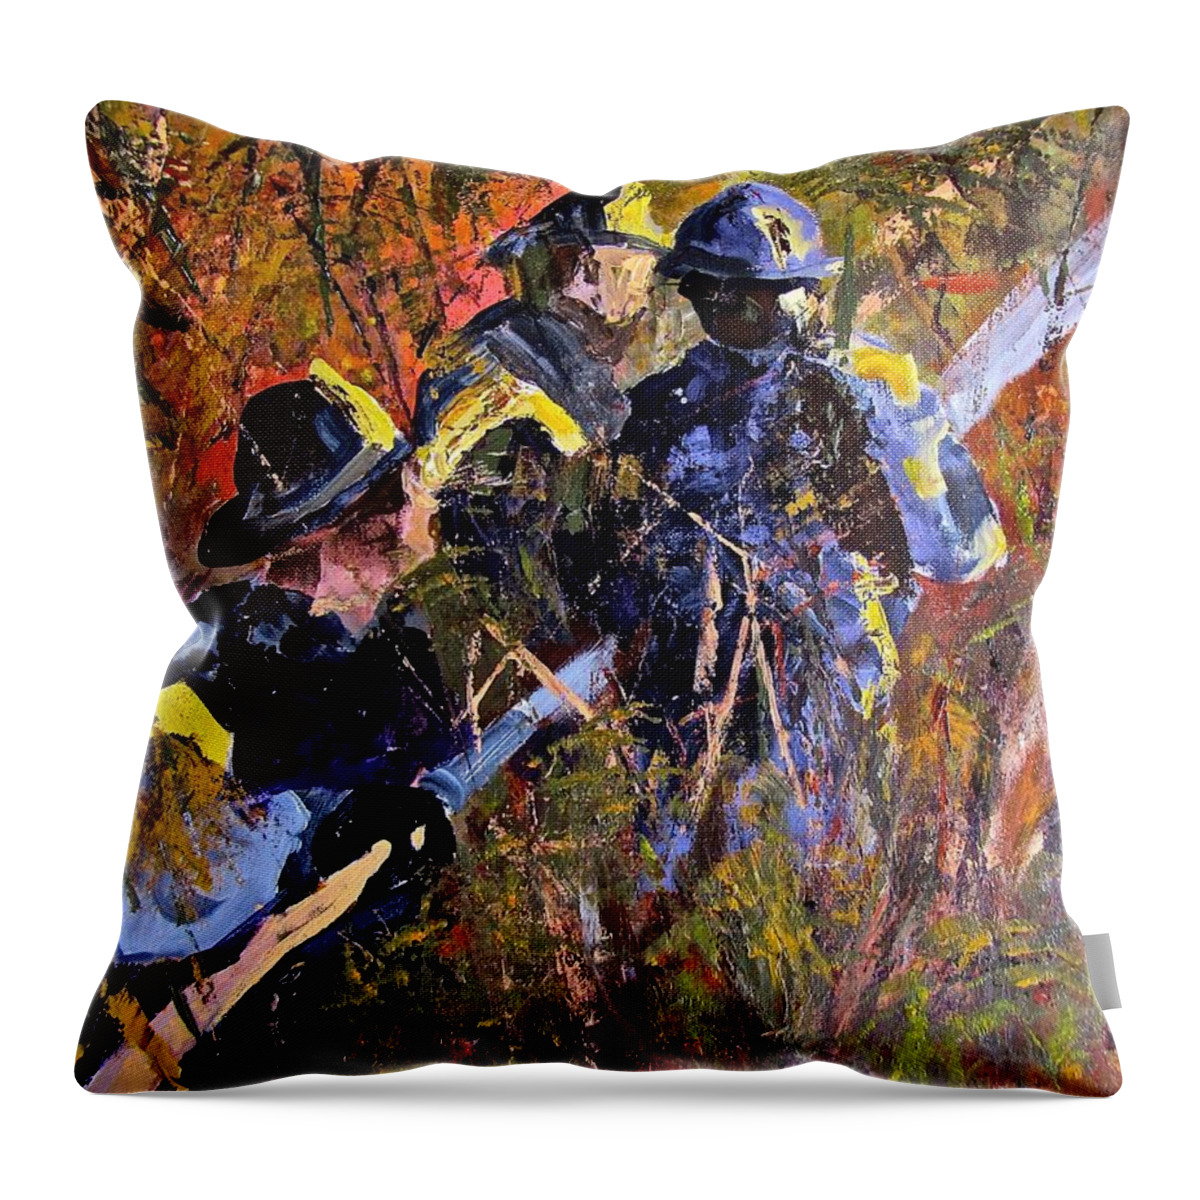 Fire Throw Pillow featuring the painting Heros by Barbara O'Toole